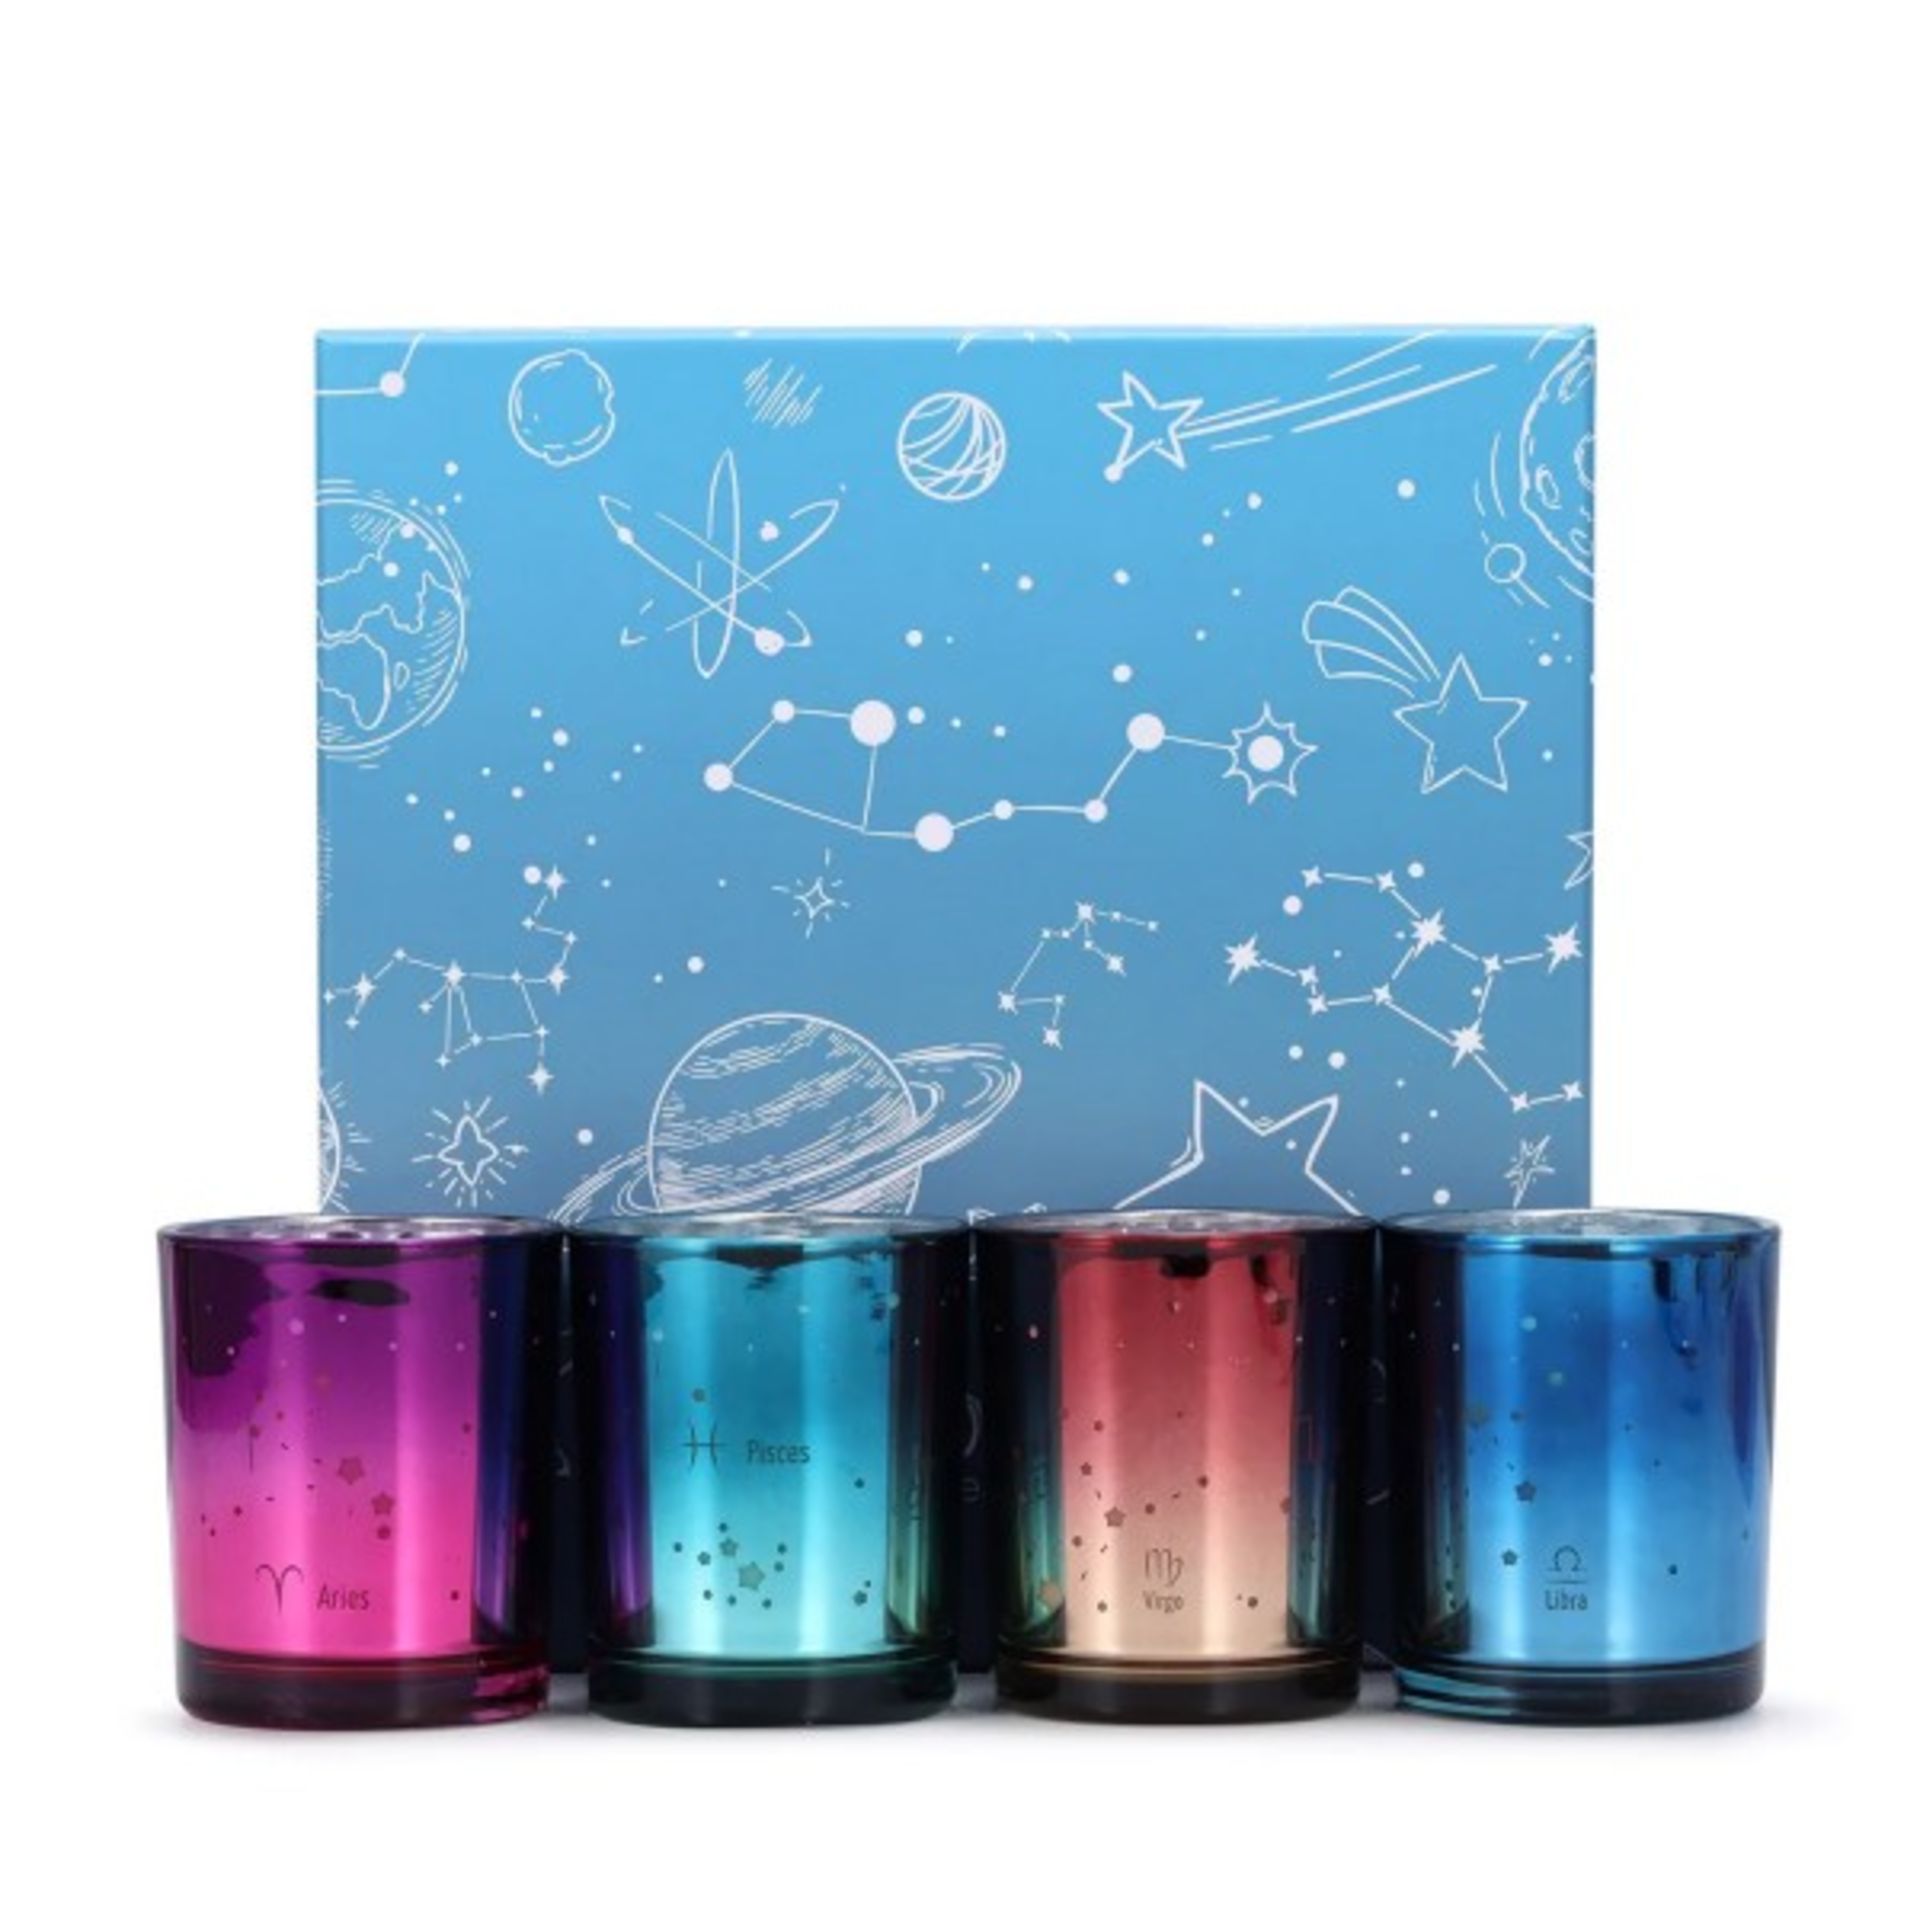 6 X NEW PACKAGED 4 Piece Aromatherapy Scented Candle Set. (SKU:BEL-SC-07) GALAXY THEME: Each